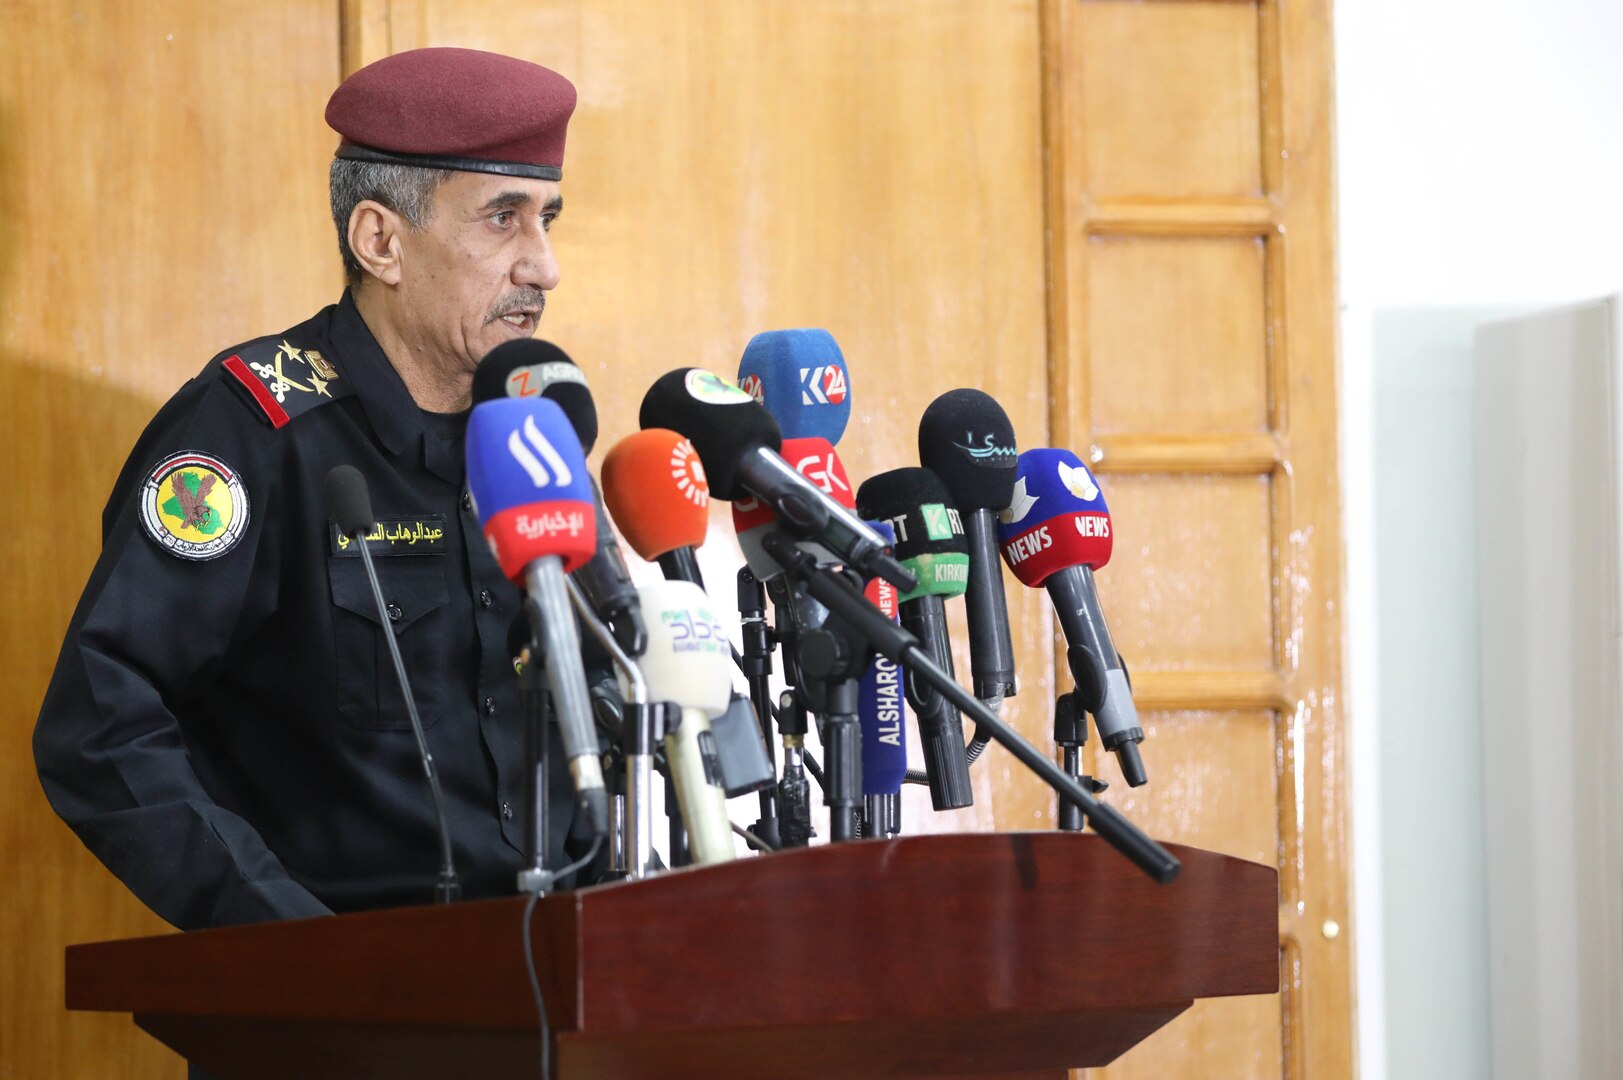 Staff Gen. Abdel Wahab al-Saadi, head of the Iraqi Counter-Terrorism Service, speaks during a counter-terrorism conference May 9, 2022, in Baghdad, Iraq. The counter-terrorism conference brought together key leaders from the Iraqi Ministry of the Interior, Iraqi Ministry of Defense and the Kurdistan Regional Government Ministry of Peshmerga to discuss enhancing joint planning, coordination and collaboration between all counter-terrorism elements in support of the shared goal of defeating terrorism. (U.S. Army photo by Staff Sgt. Bree-Ann Ramos-Clifton)